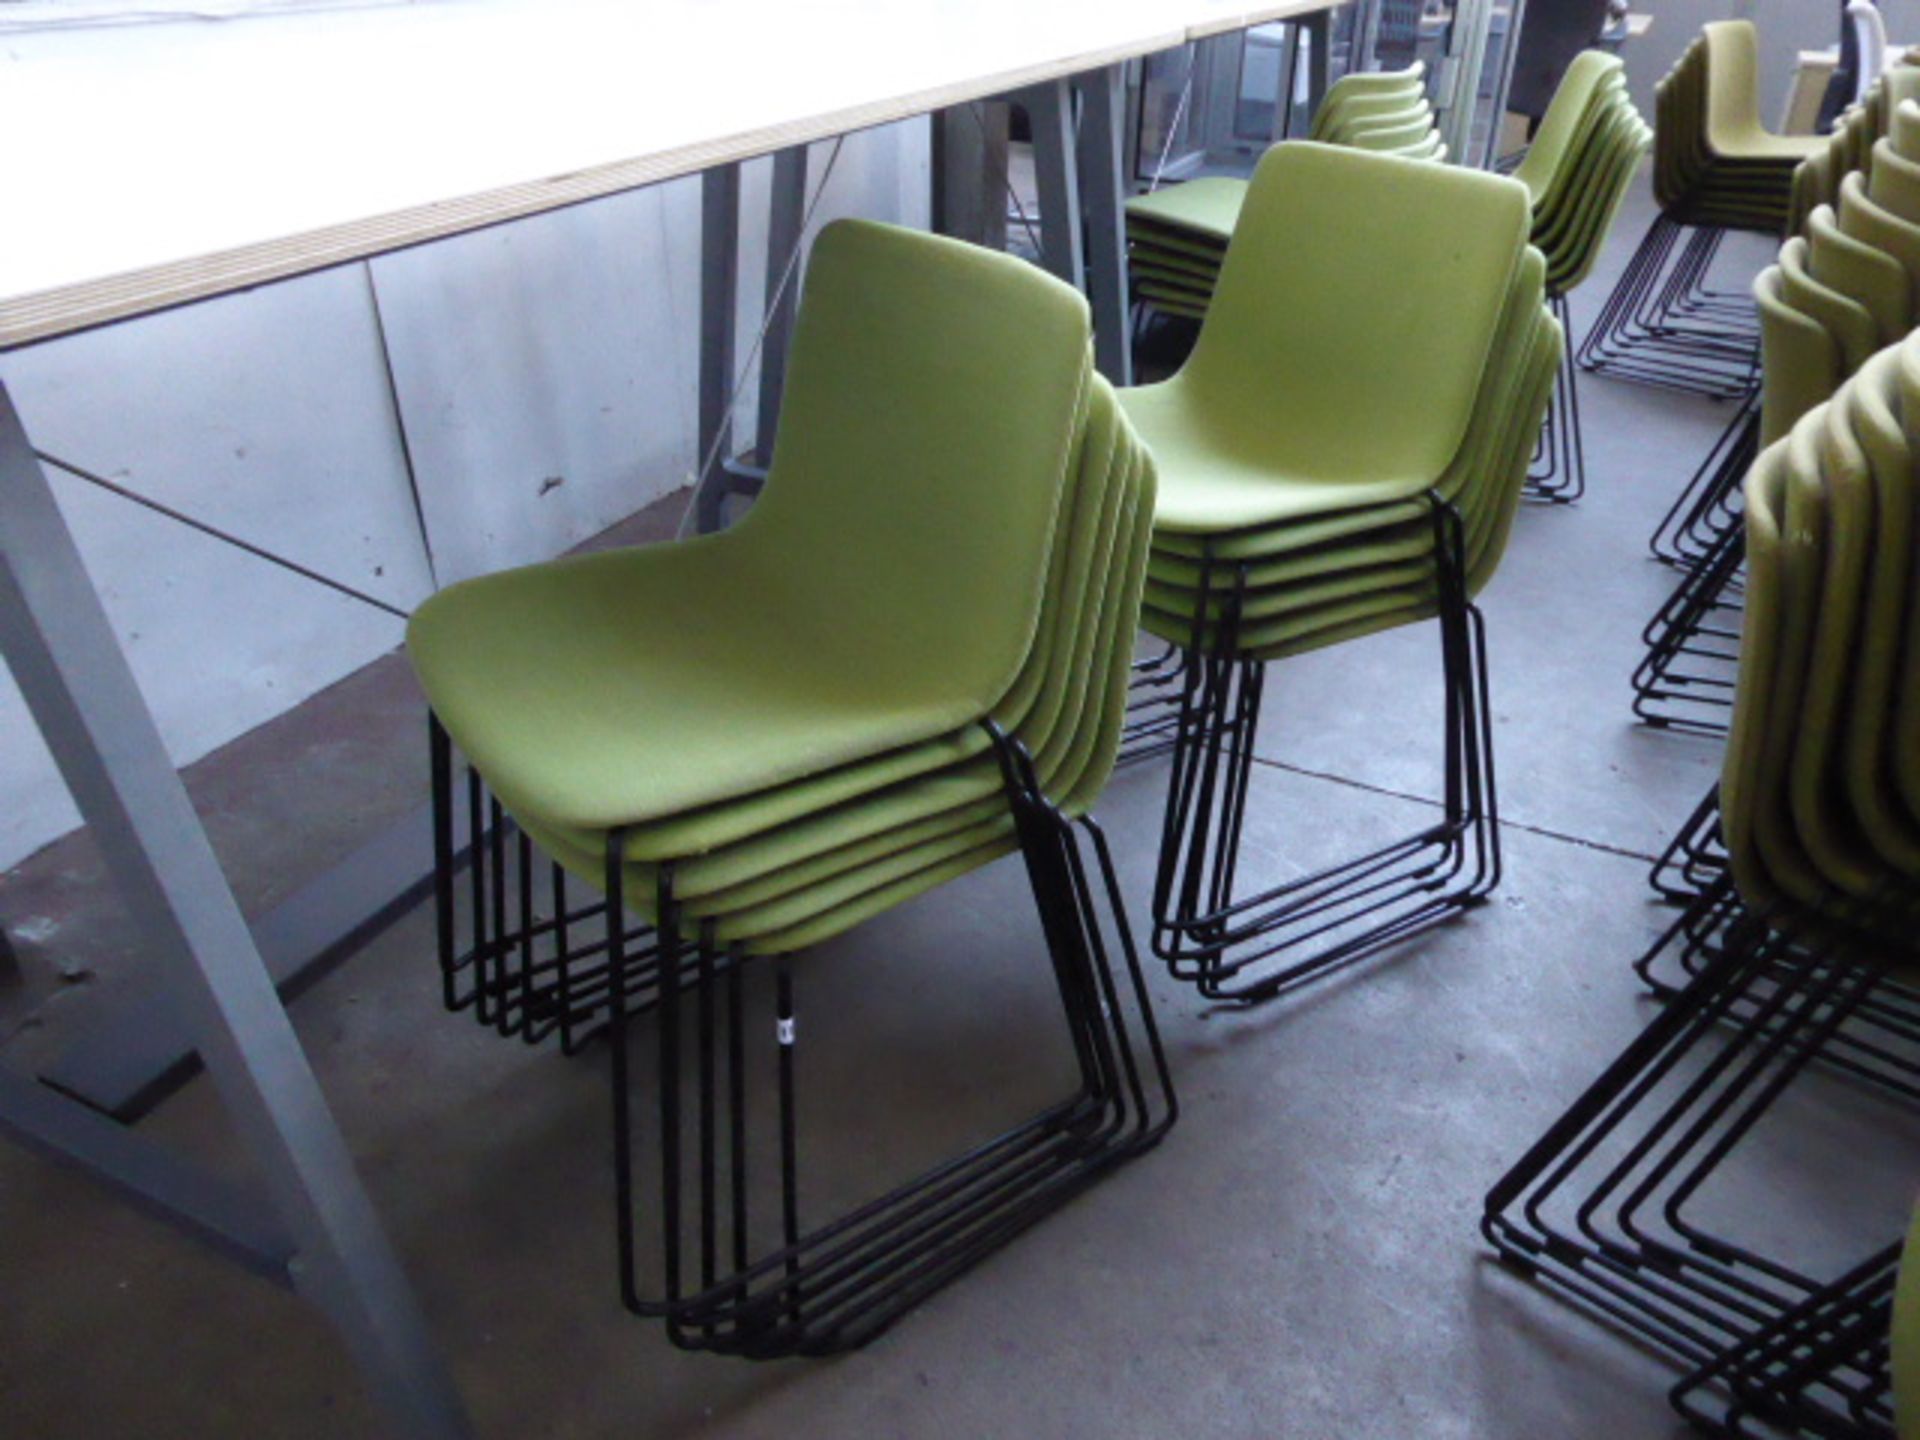 12 Fredericia Welling/Ludvik, item 4102, black framed green cloth stacking chairs